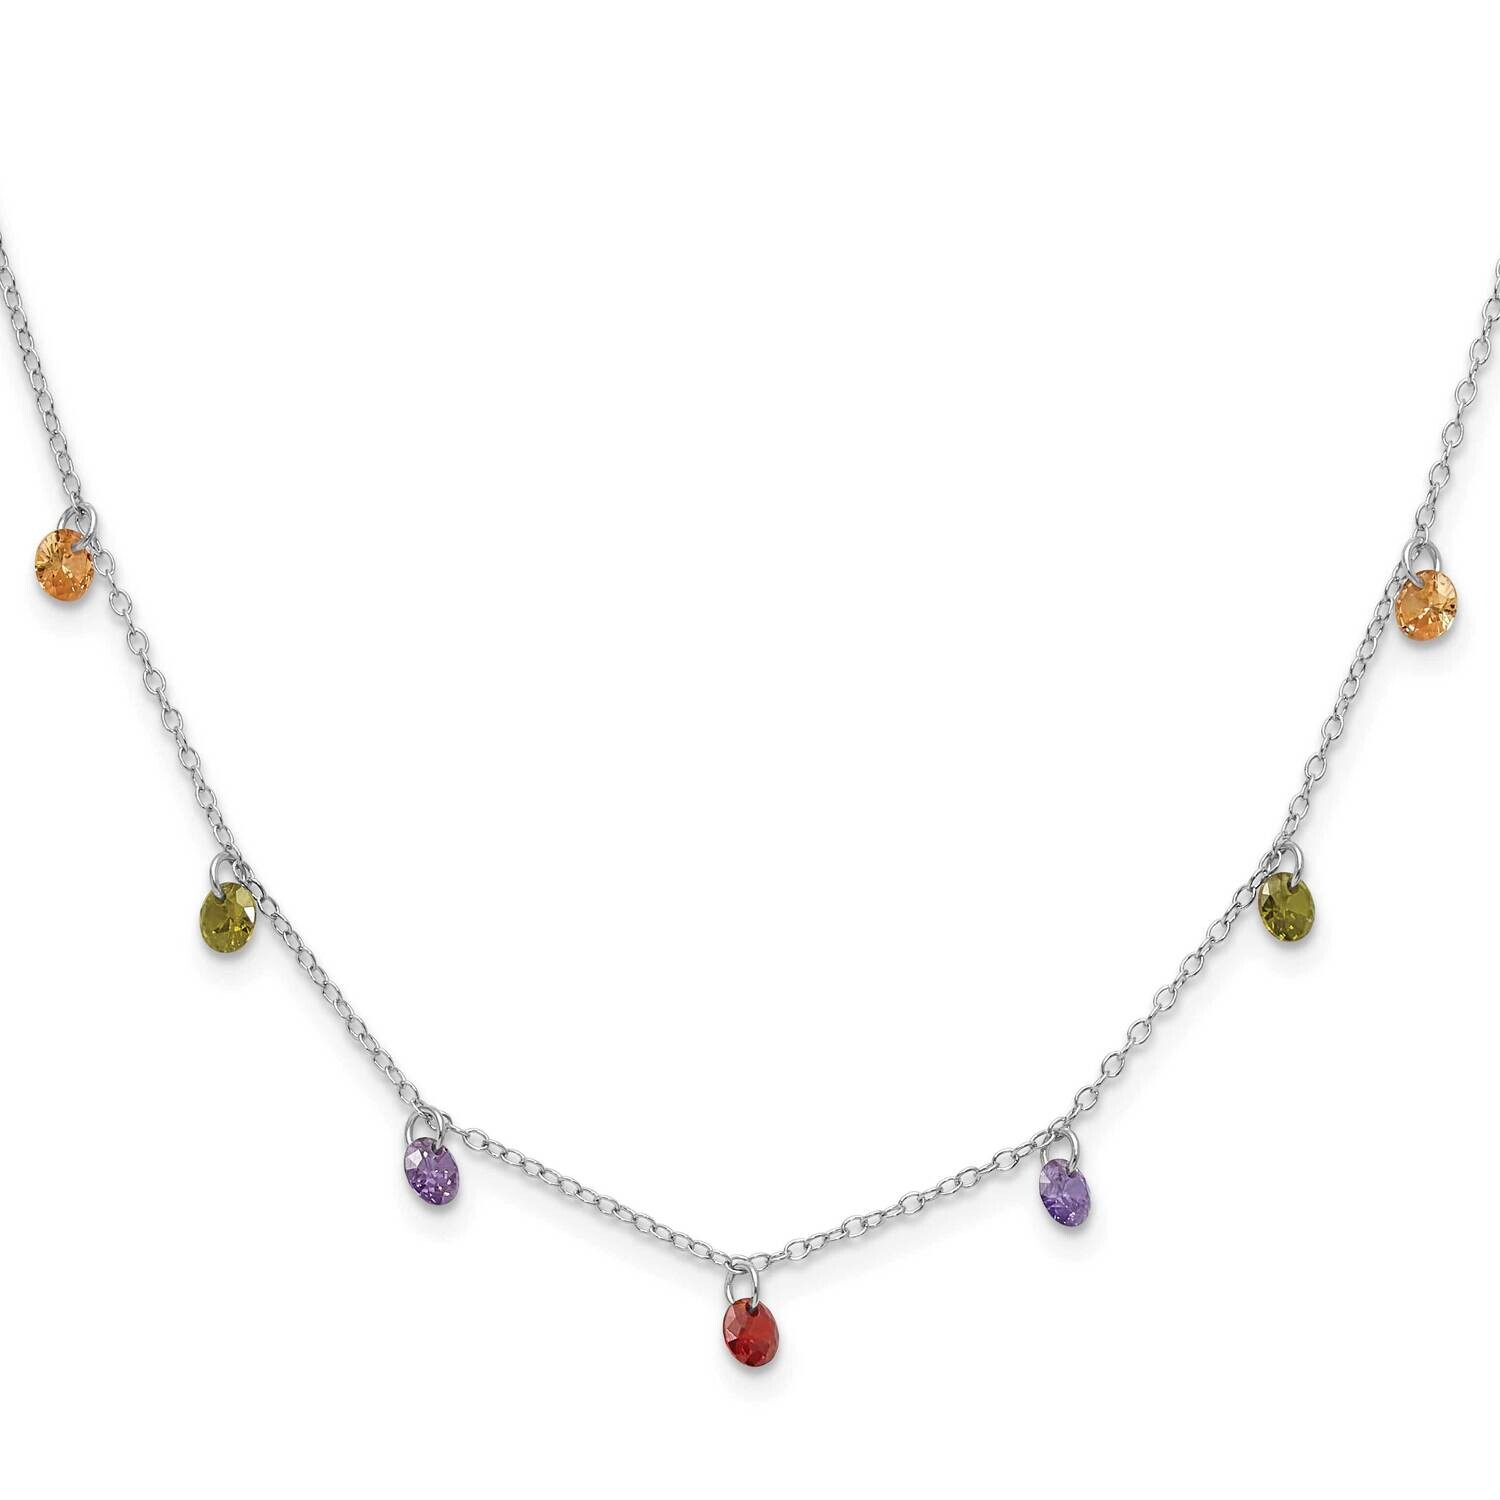 Prizma Rhodium Plated 16 Inch Dangling Colorful CZ Necklace 2 Inch Extender Sterling Silver QG5044-16